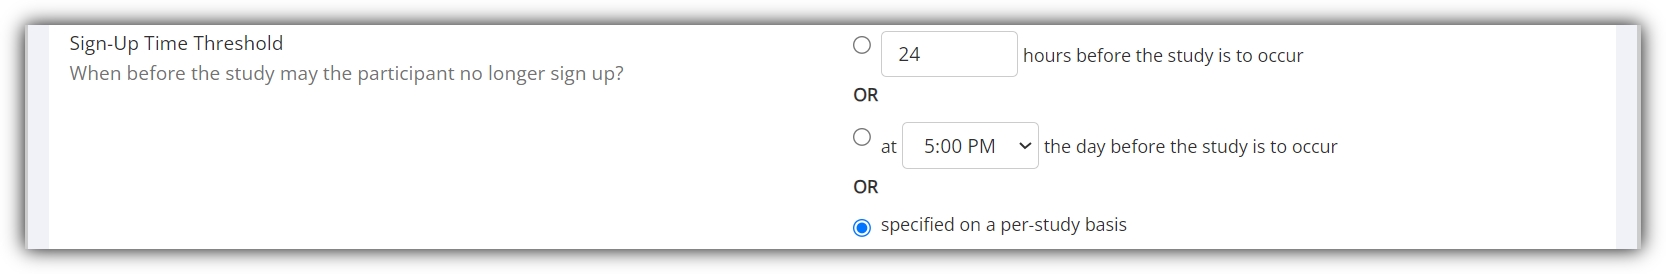 Sign-up options in System Settings